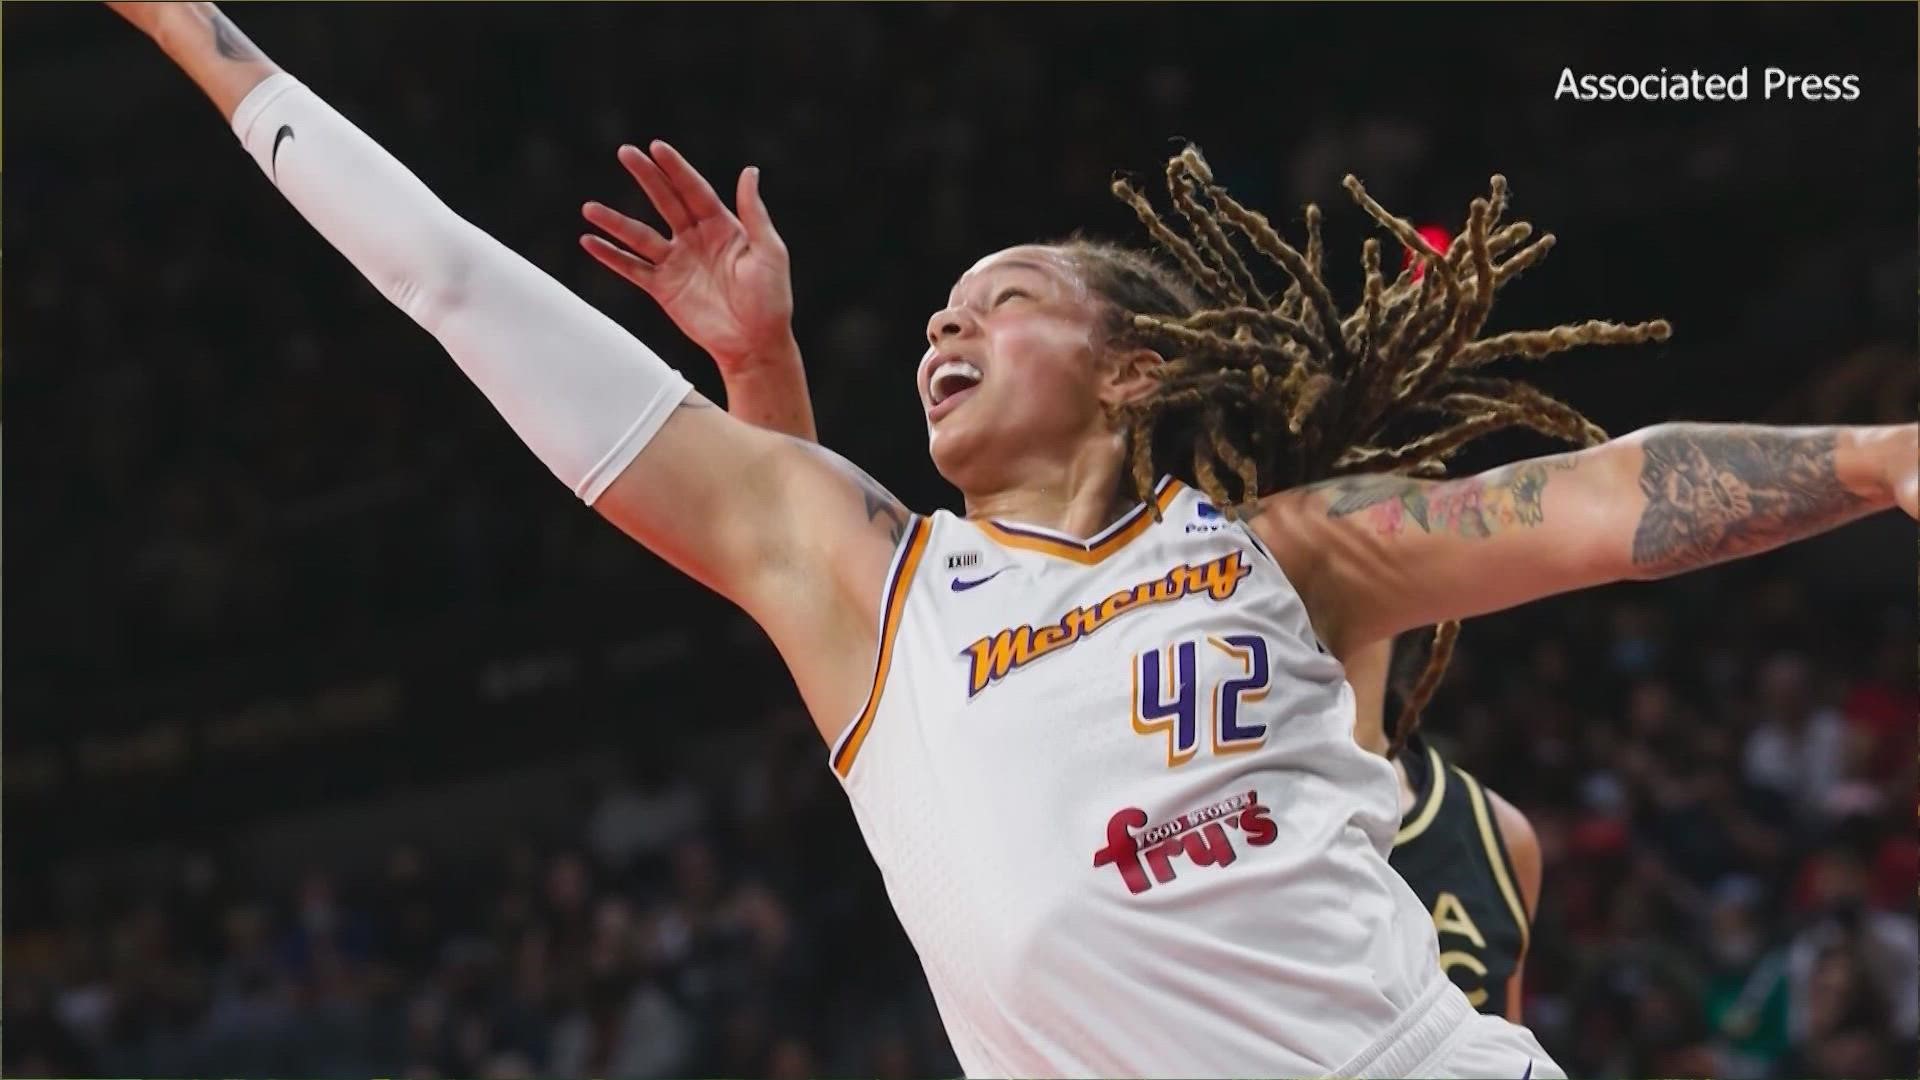 Brittney Griner, a WNBA star and Olympian, was sentenced to nine years in prison in Russia on Thursday. Now Griner's teammates and others are reacting to the news.